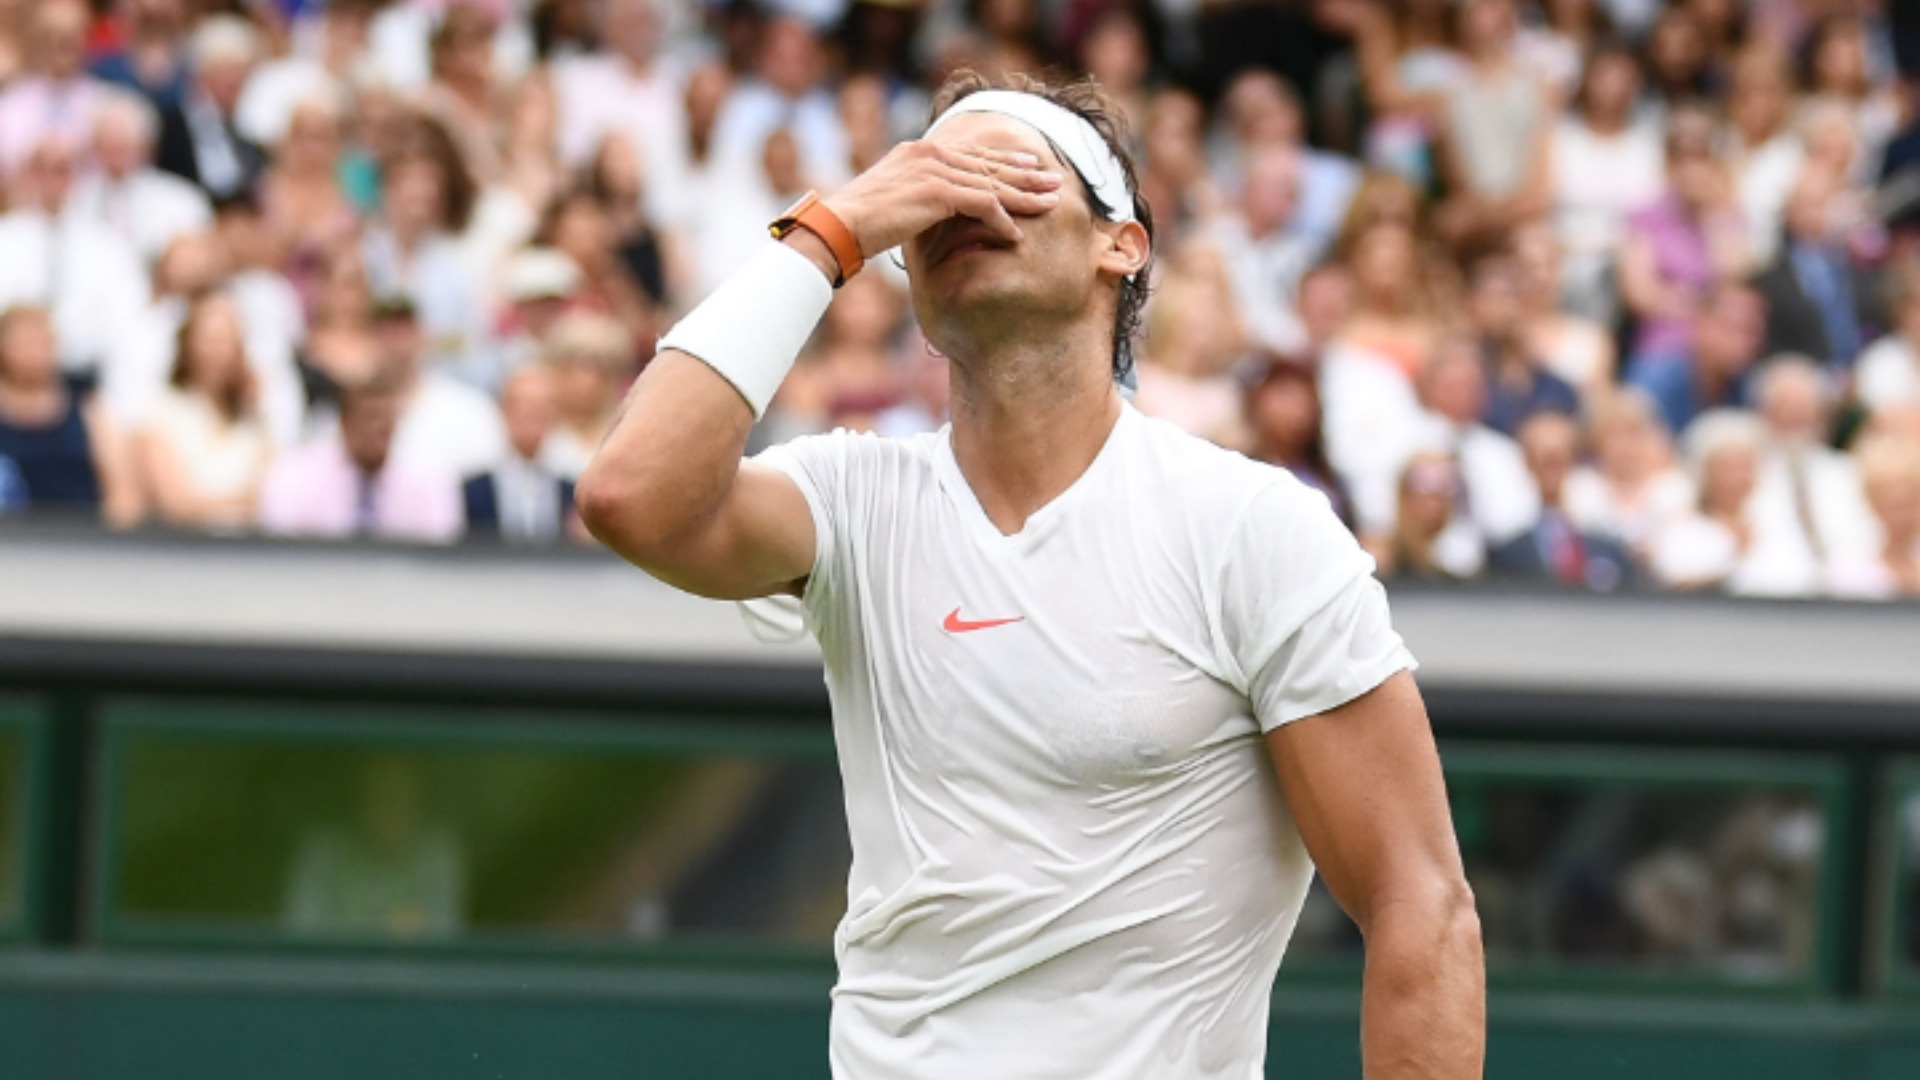 Wimbledon would lack respect in seeding Roger Federer - the world number three - ahead of second-ranked Rafael Nadal, says the Spaniard.